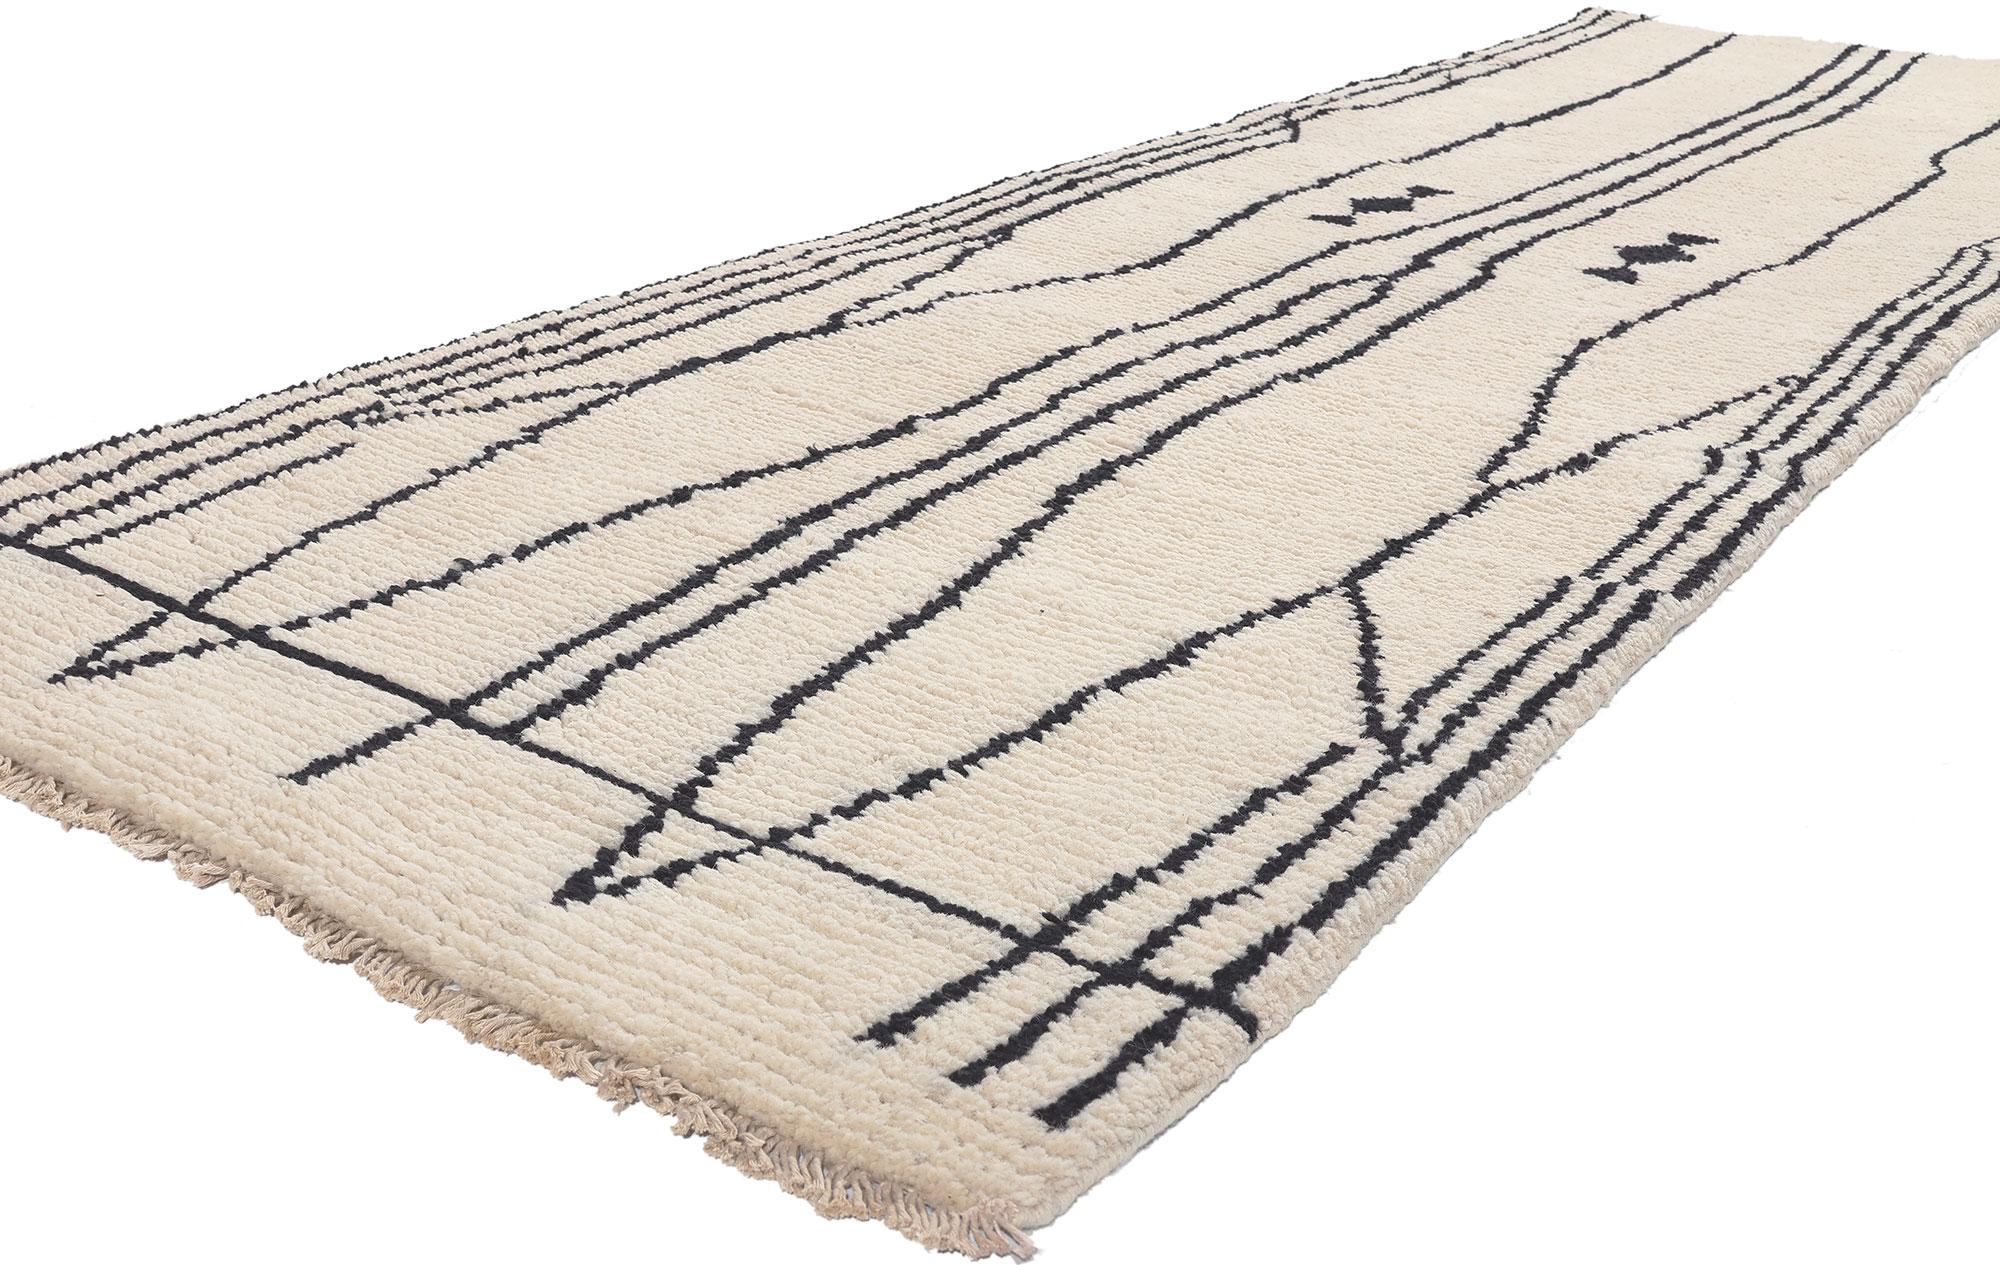 81018 Modern Moroccan Rug Runner, 03'04 x 10'11. This hand-knotted wool Moroccan rug runner skillfully combines Organic Modern and Shibui principles, seamlessly integrating contrasting asymmetrical black lines with a neutral beige backdrop. The